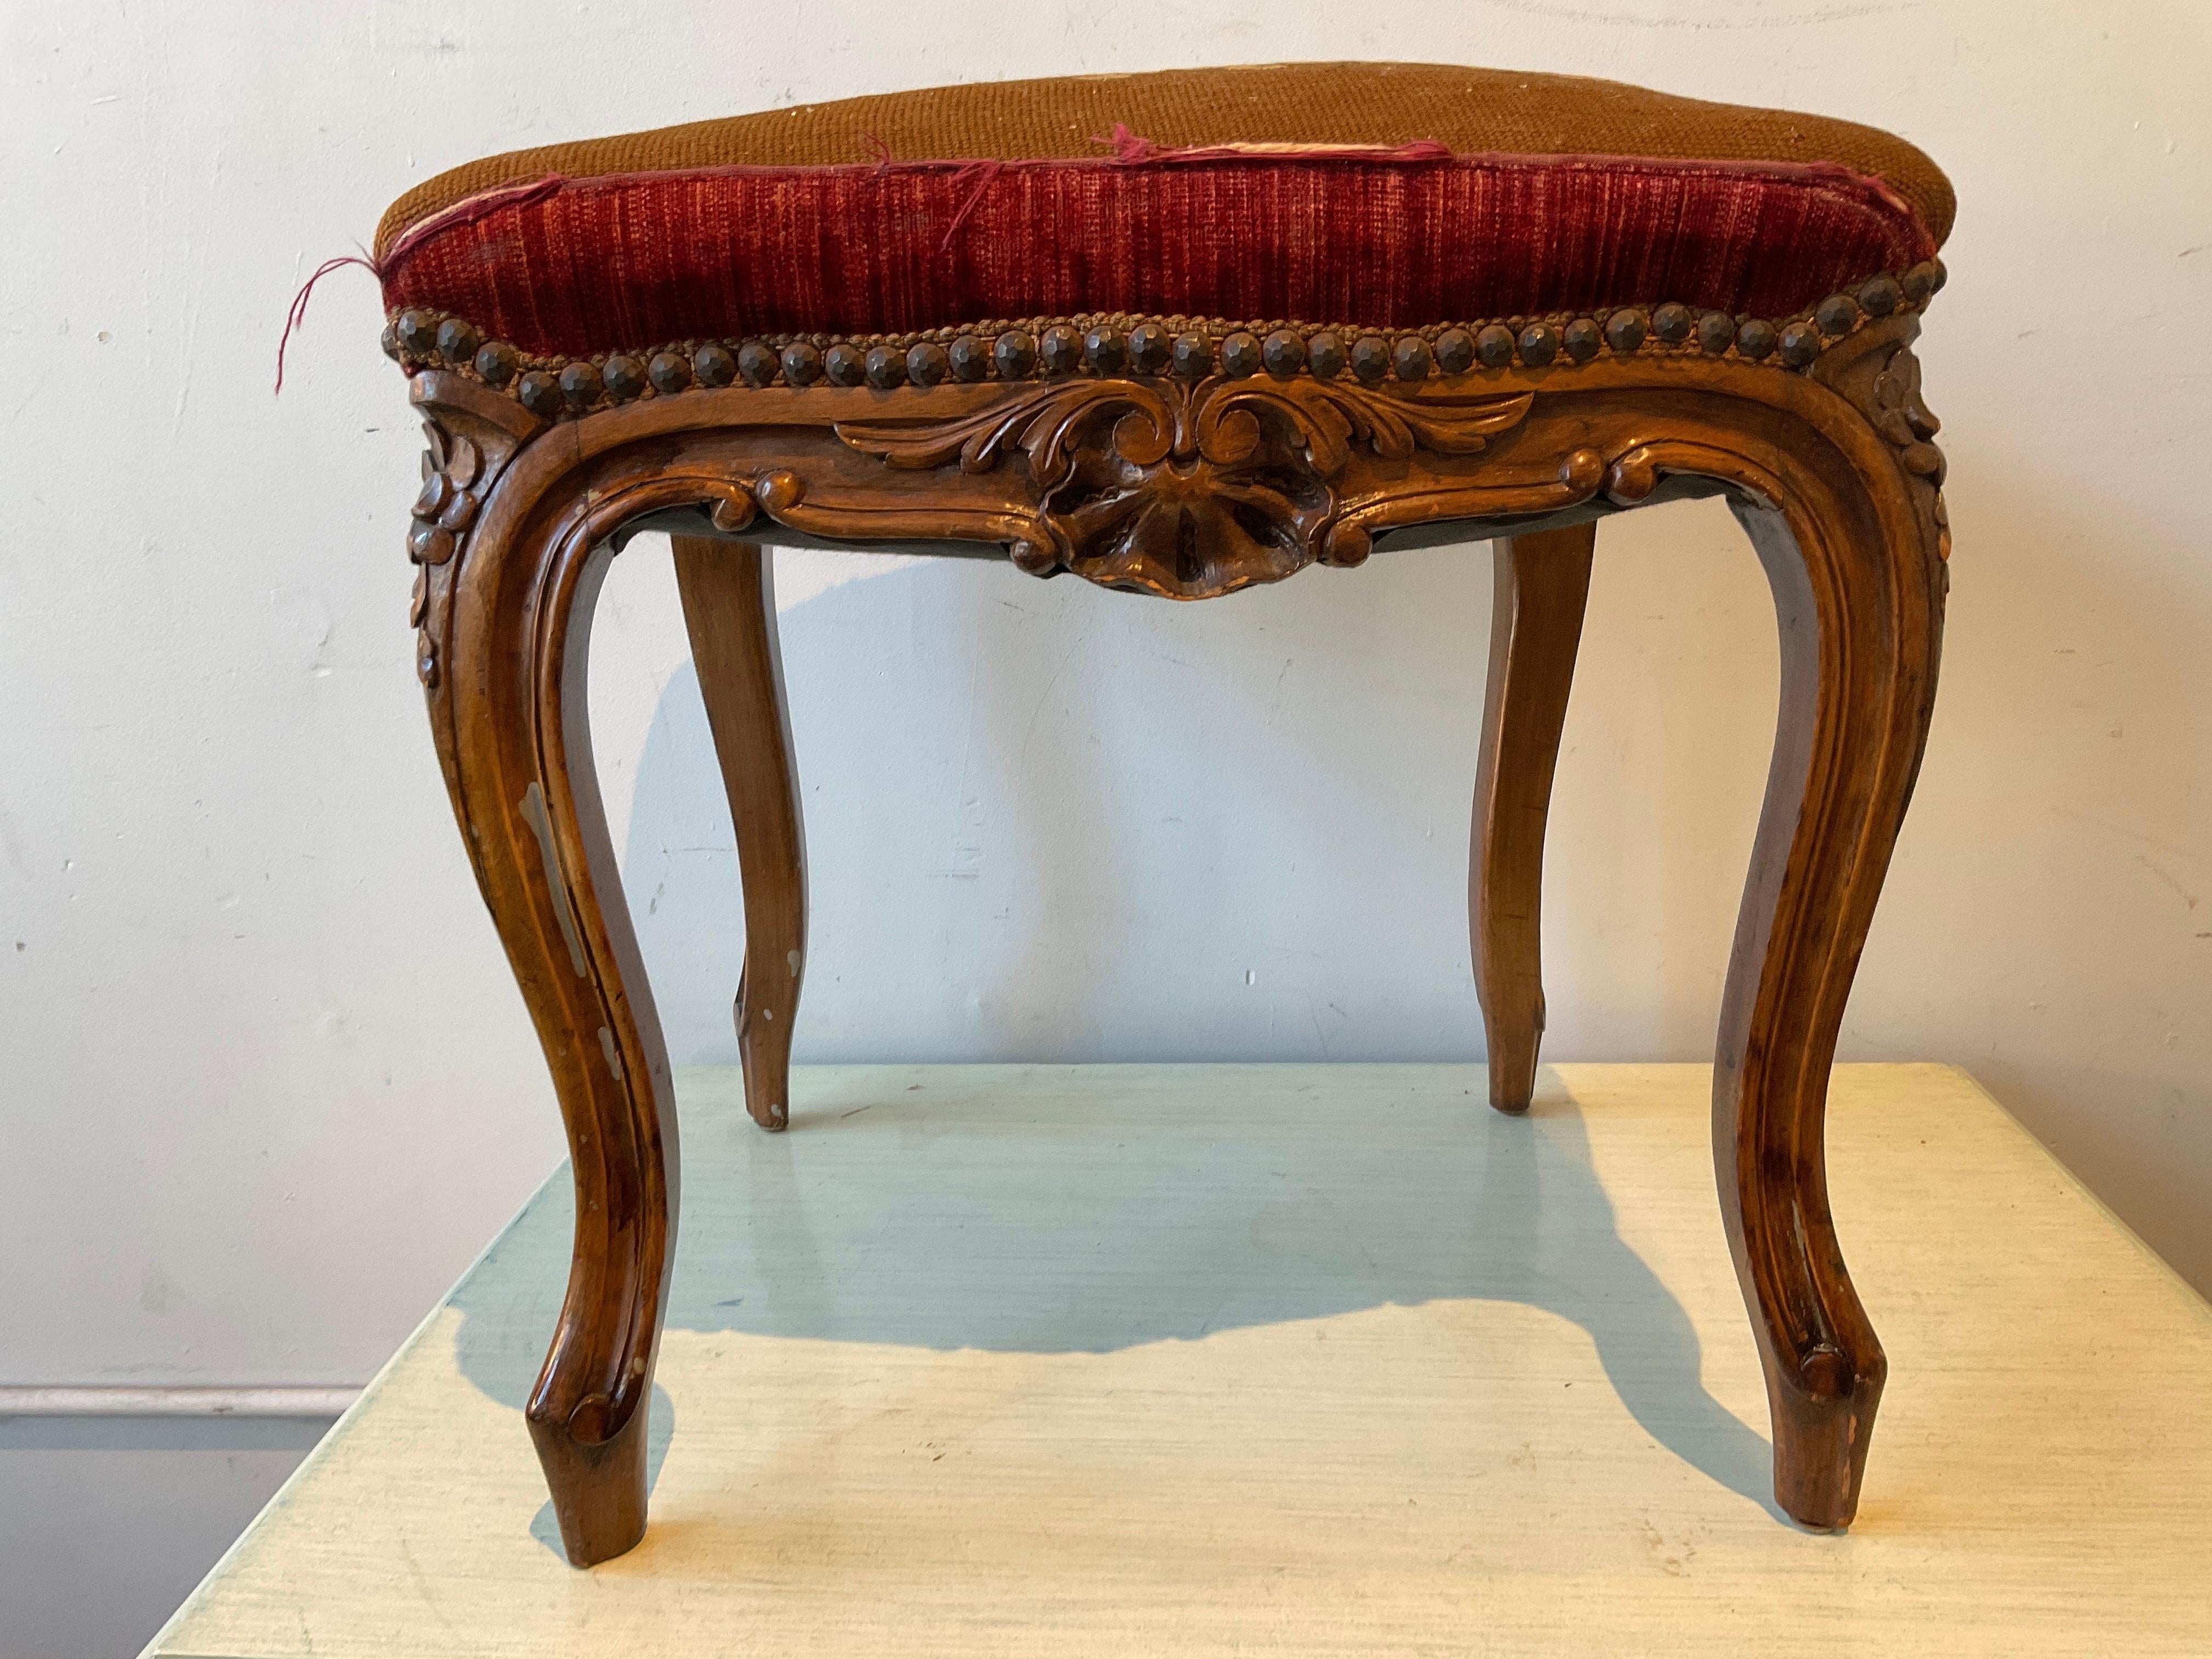 1930s Carved Wood French Footstool With Cabriolet Legs For Sale 2